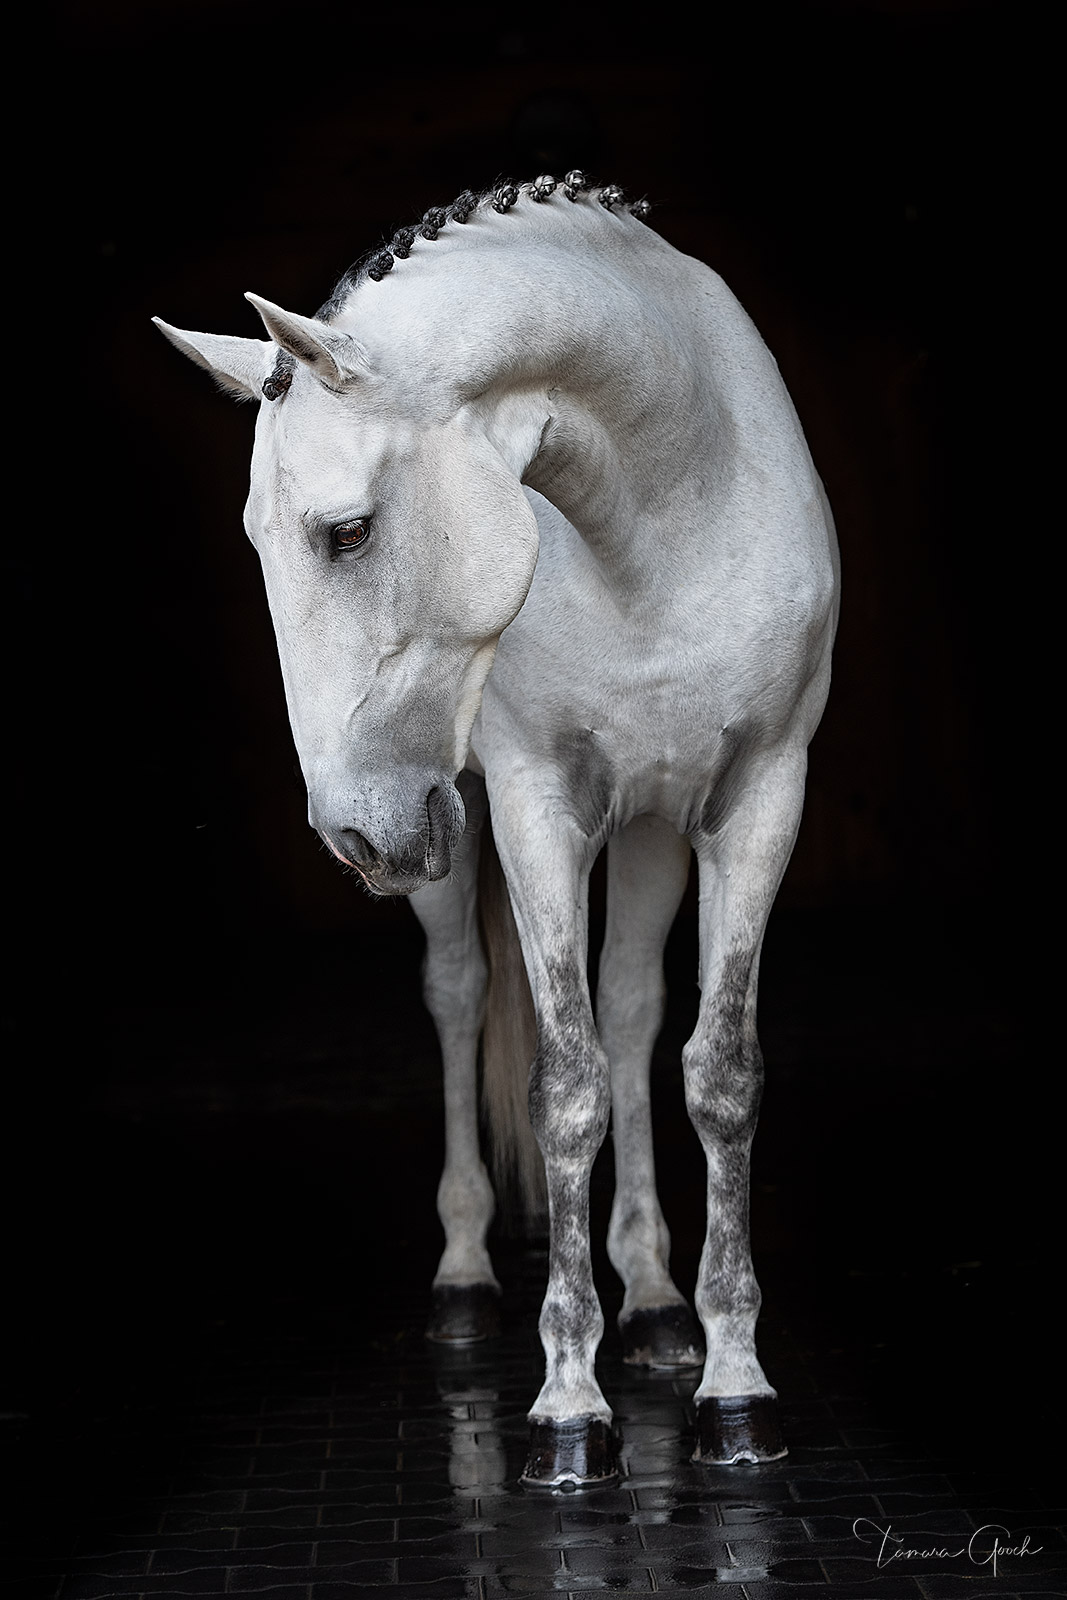 Luxury gallery quality black and white horse, equestrian fine art photo prints for sale.